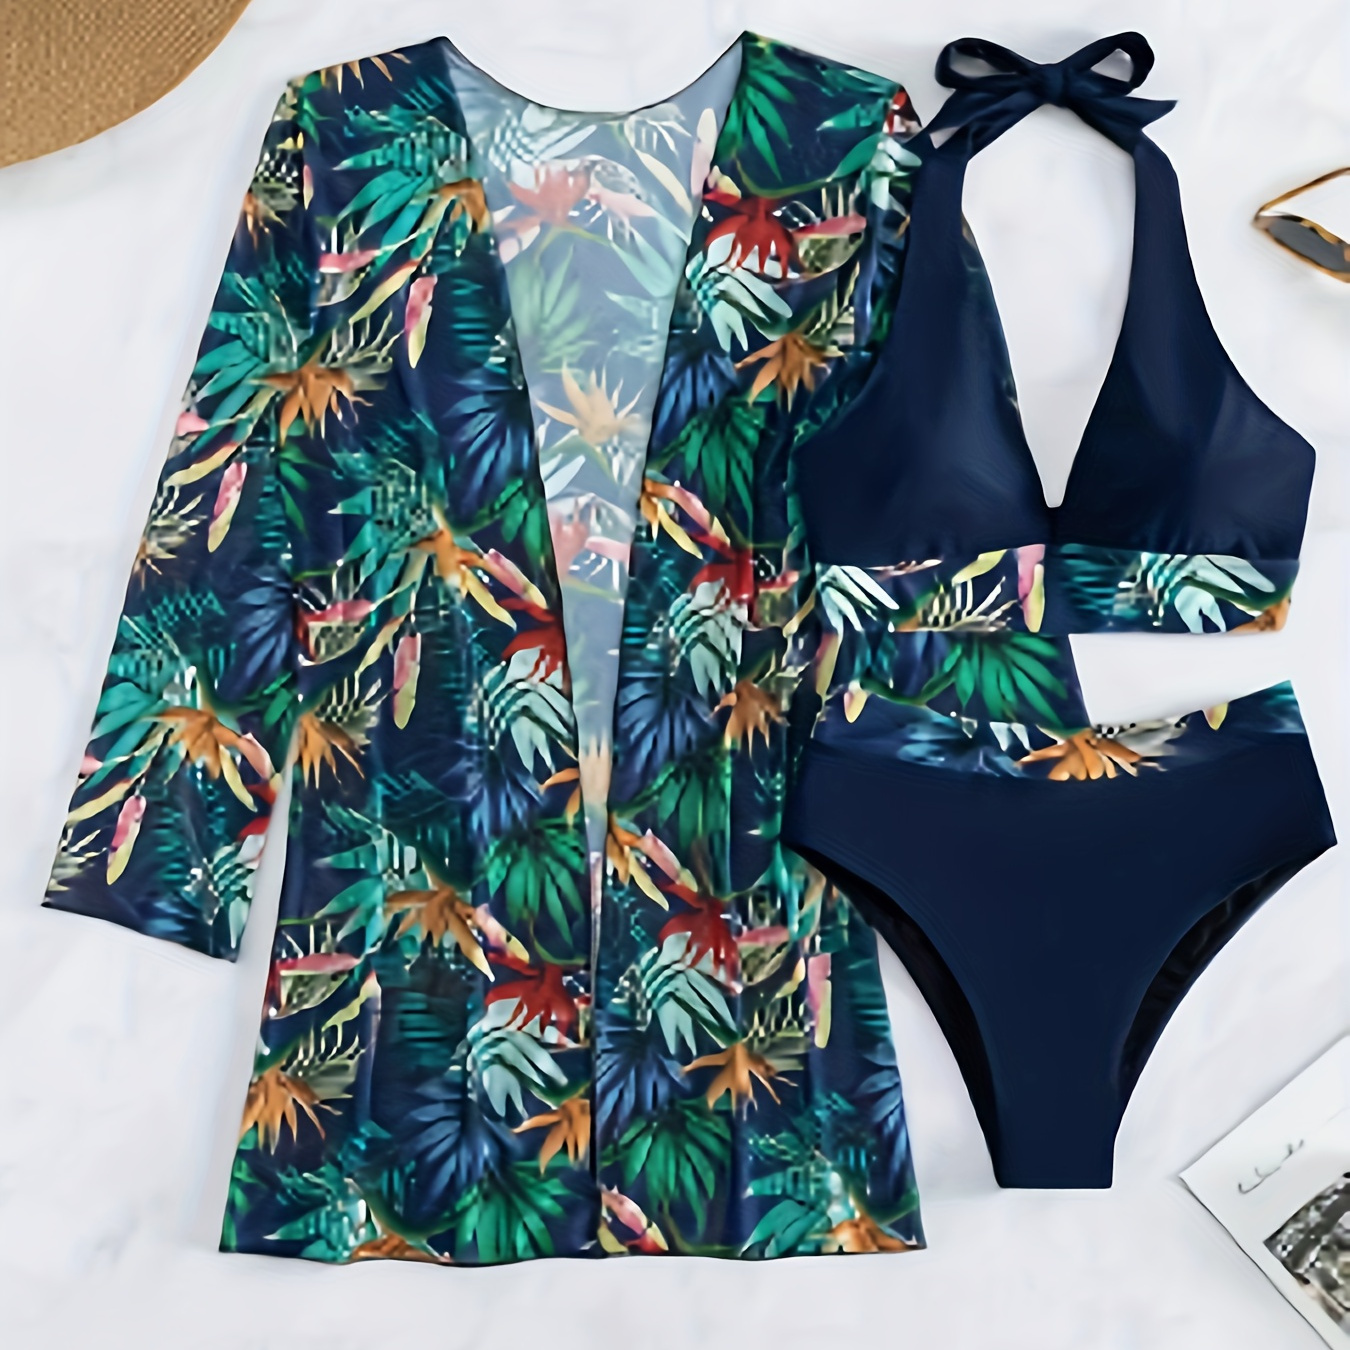 

Tropical Print 3 Piece Set Tankini, Halter V Neck High Cut With Long Sleeves Cover Up Shirt Swimsuits, Women's Swimwear & Clothing